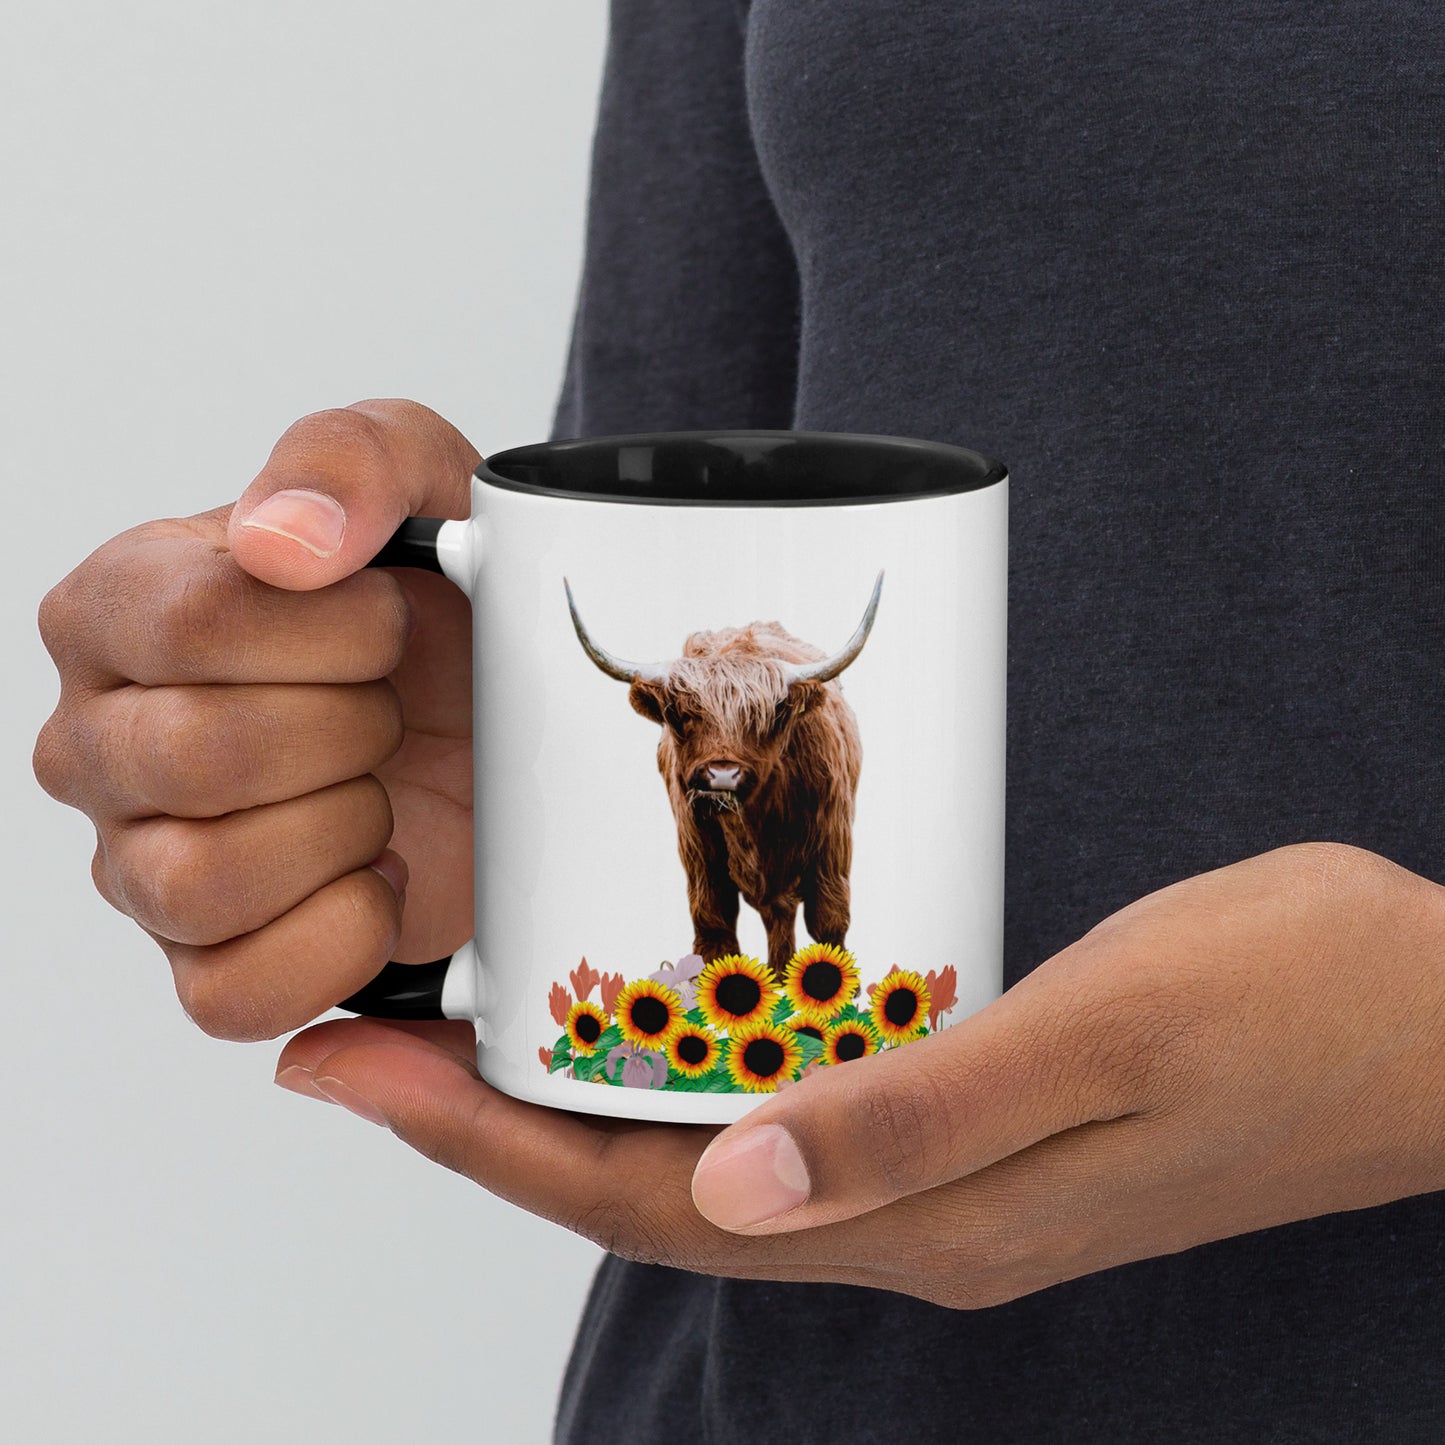 Colorful Delight: 11 Ounce Highland Cow in Sunflower Field Ceramic Mug with Vibrant Rim and Handle | 11 Oz. Mug with Color Inside